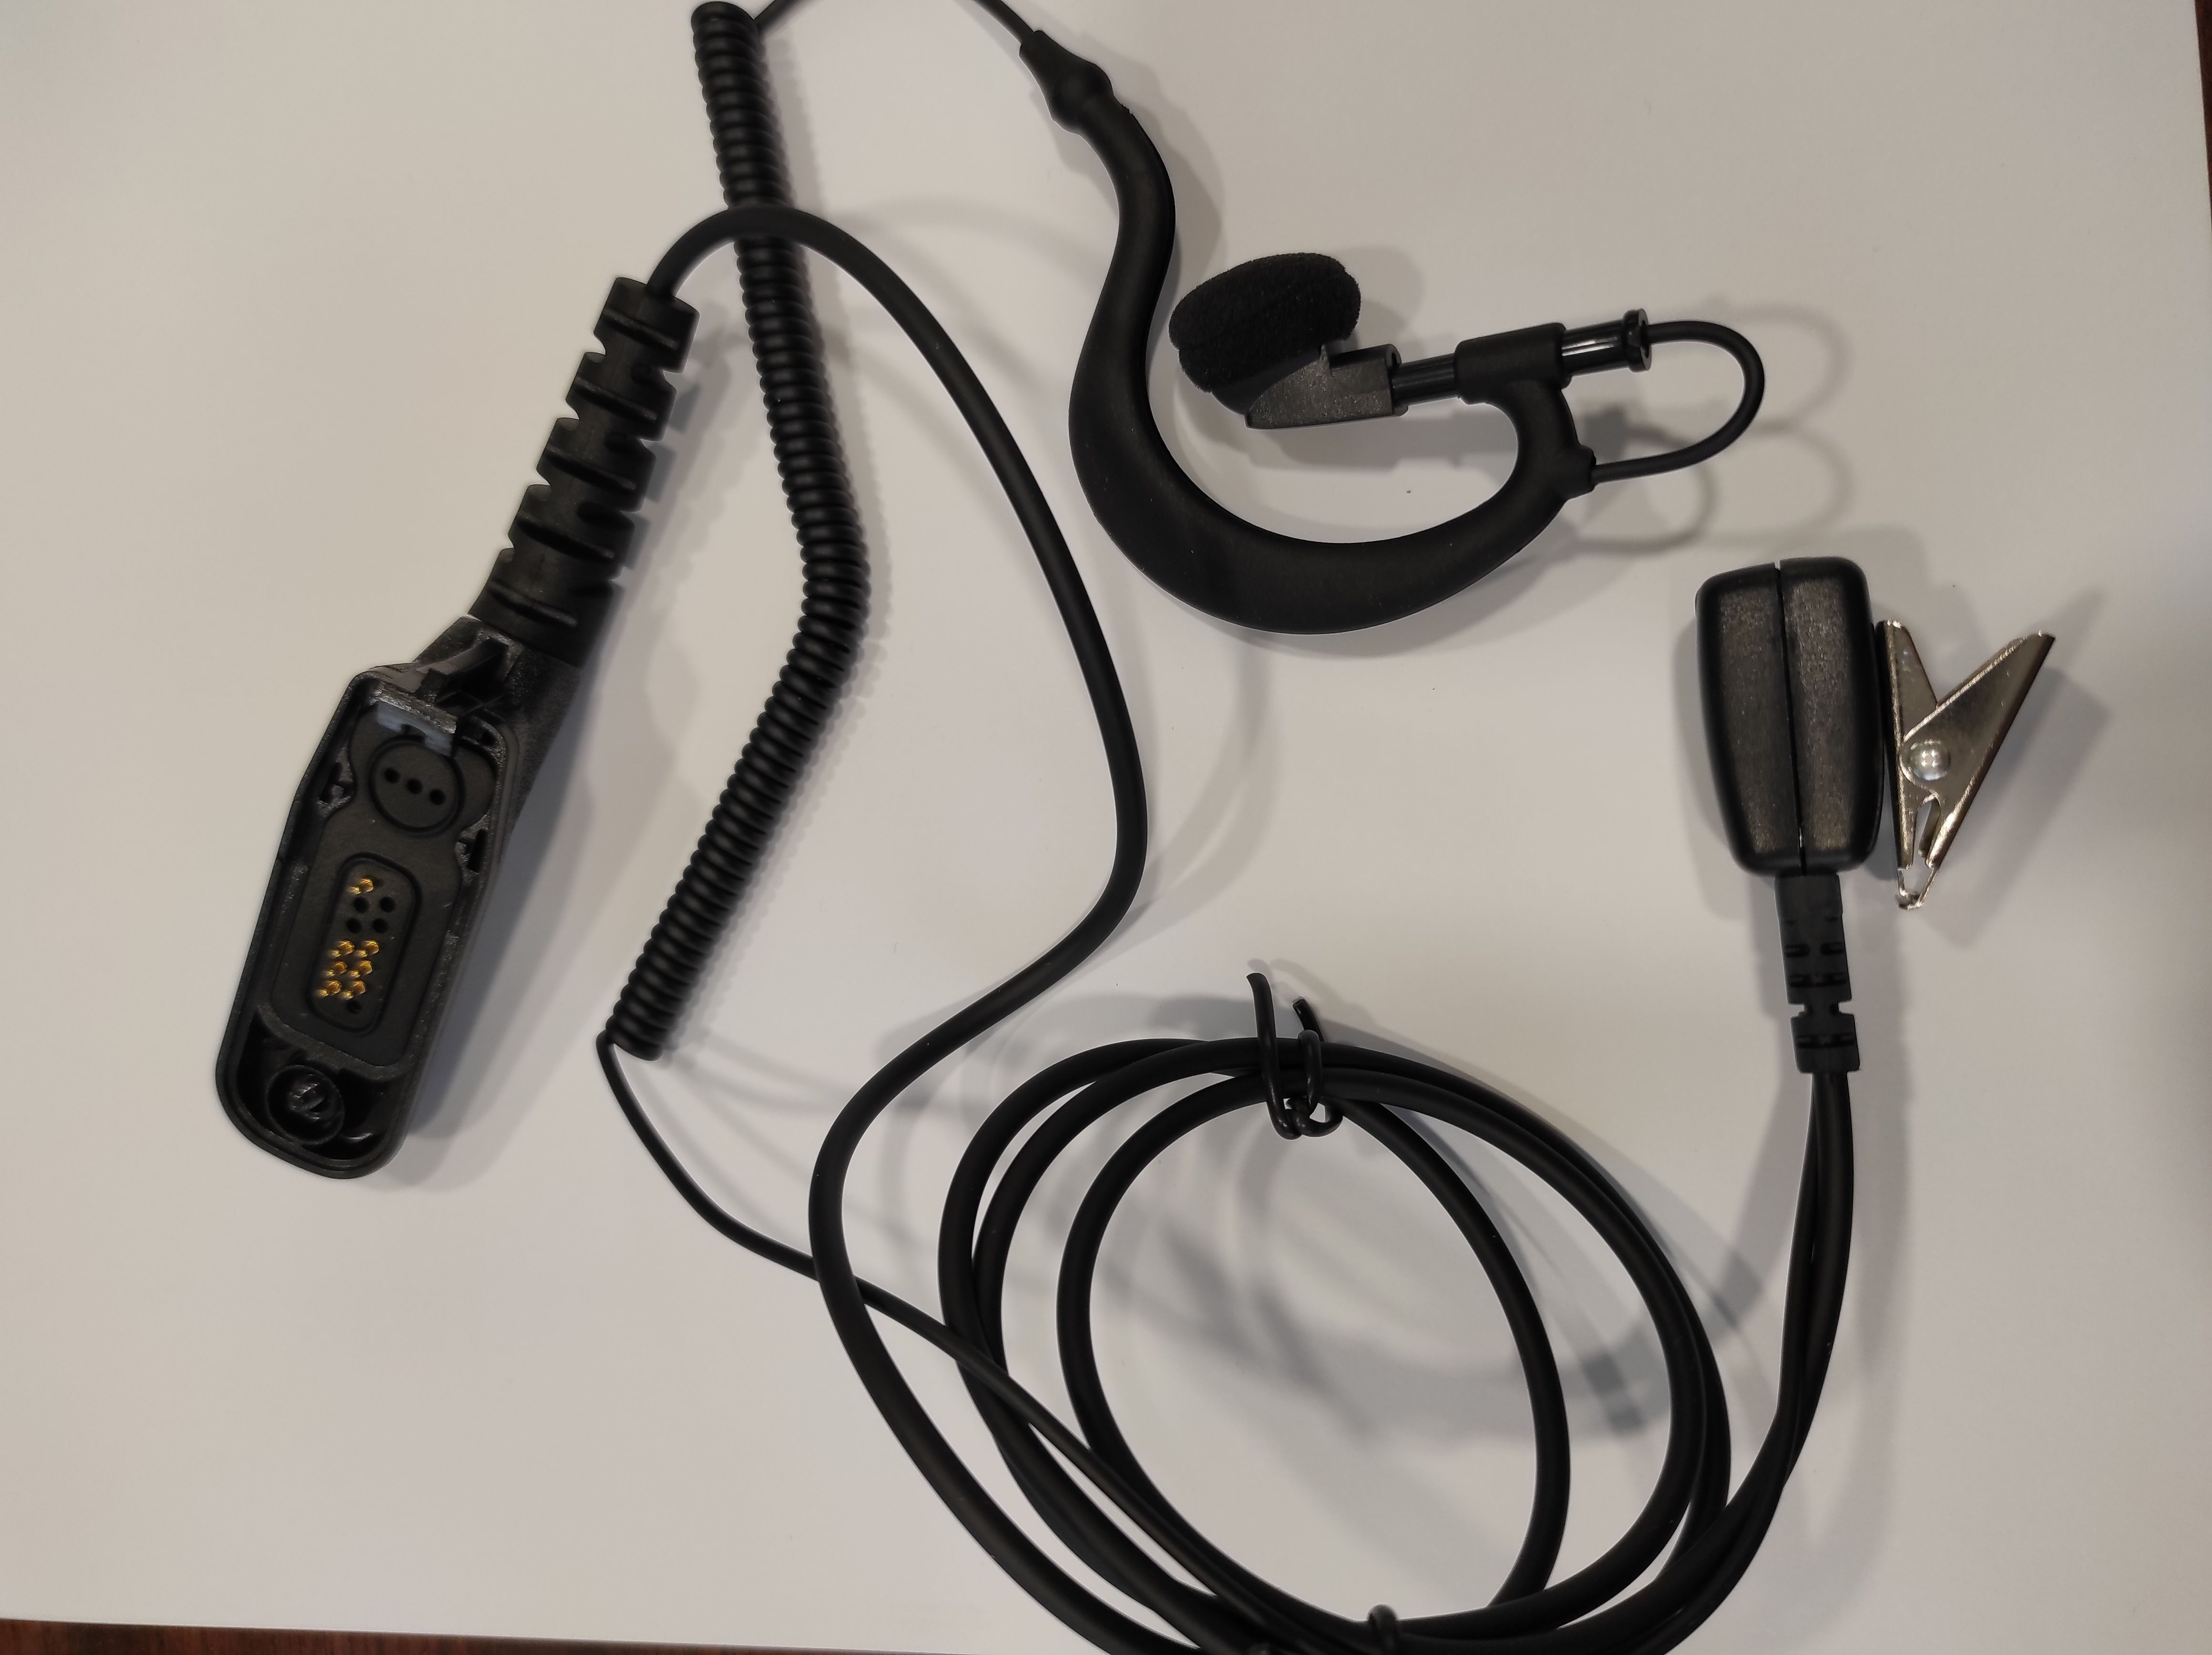 Curly wired micro-headset with M7 connector for Motorola DP4/3